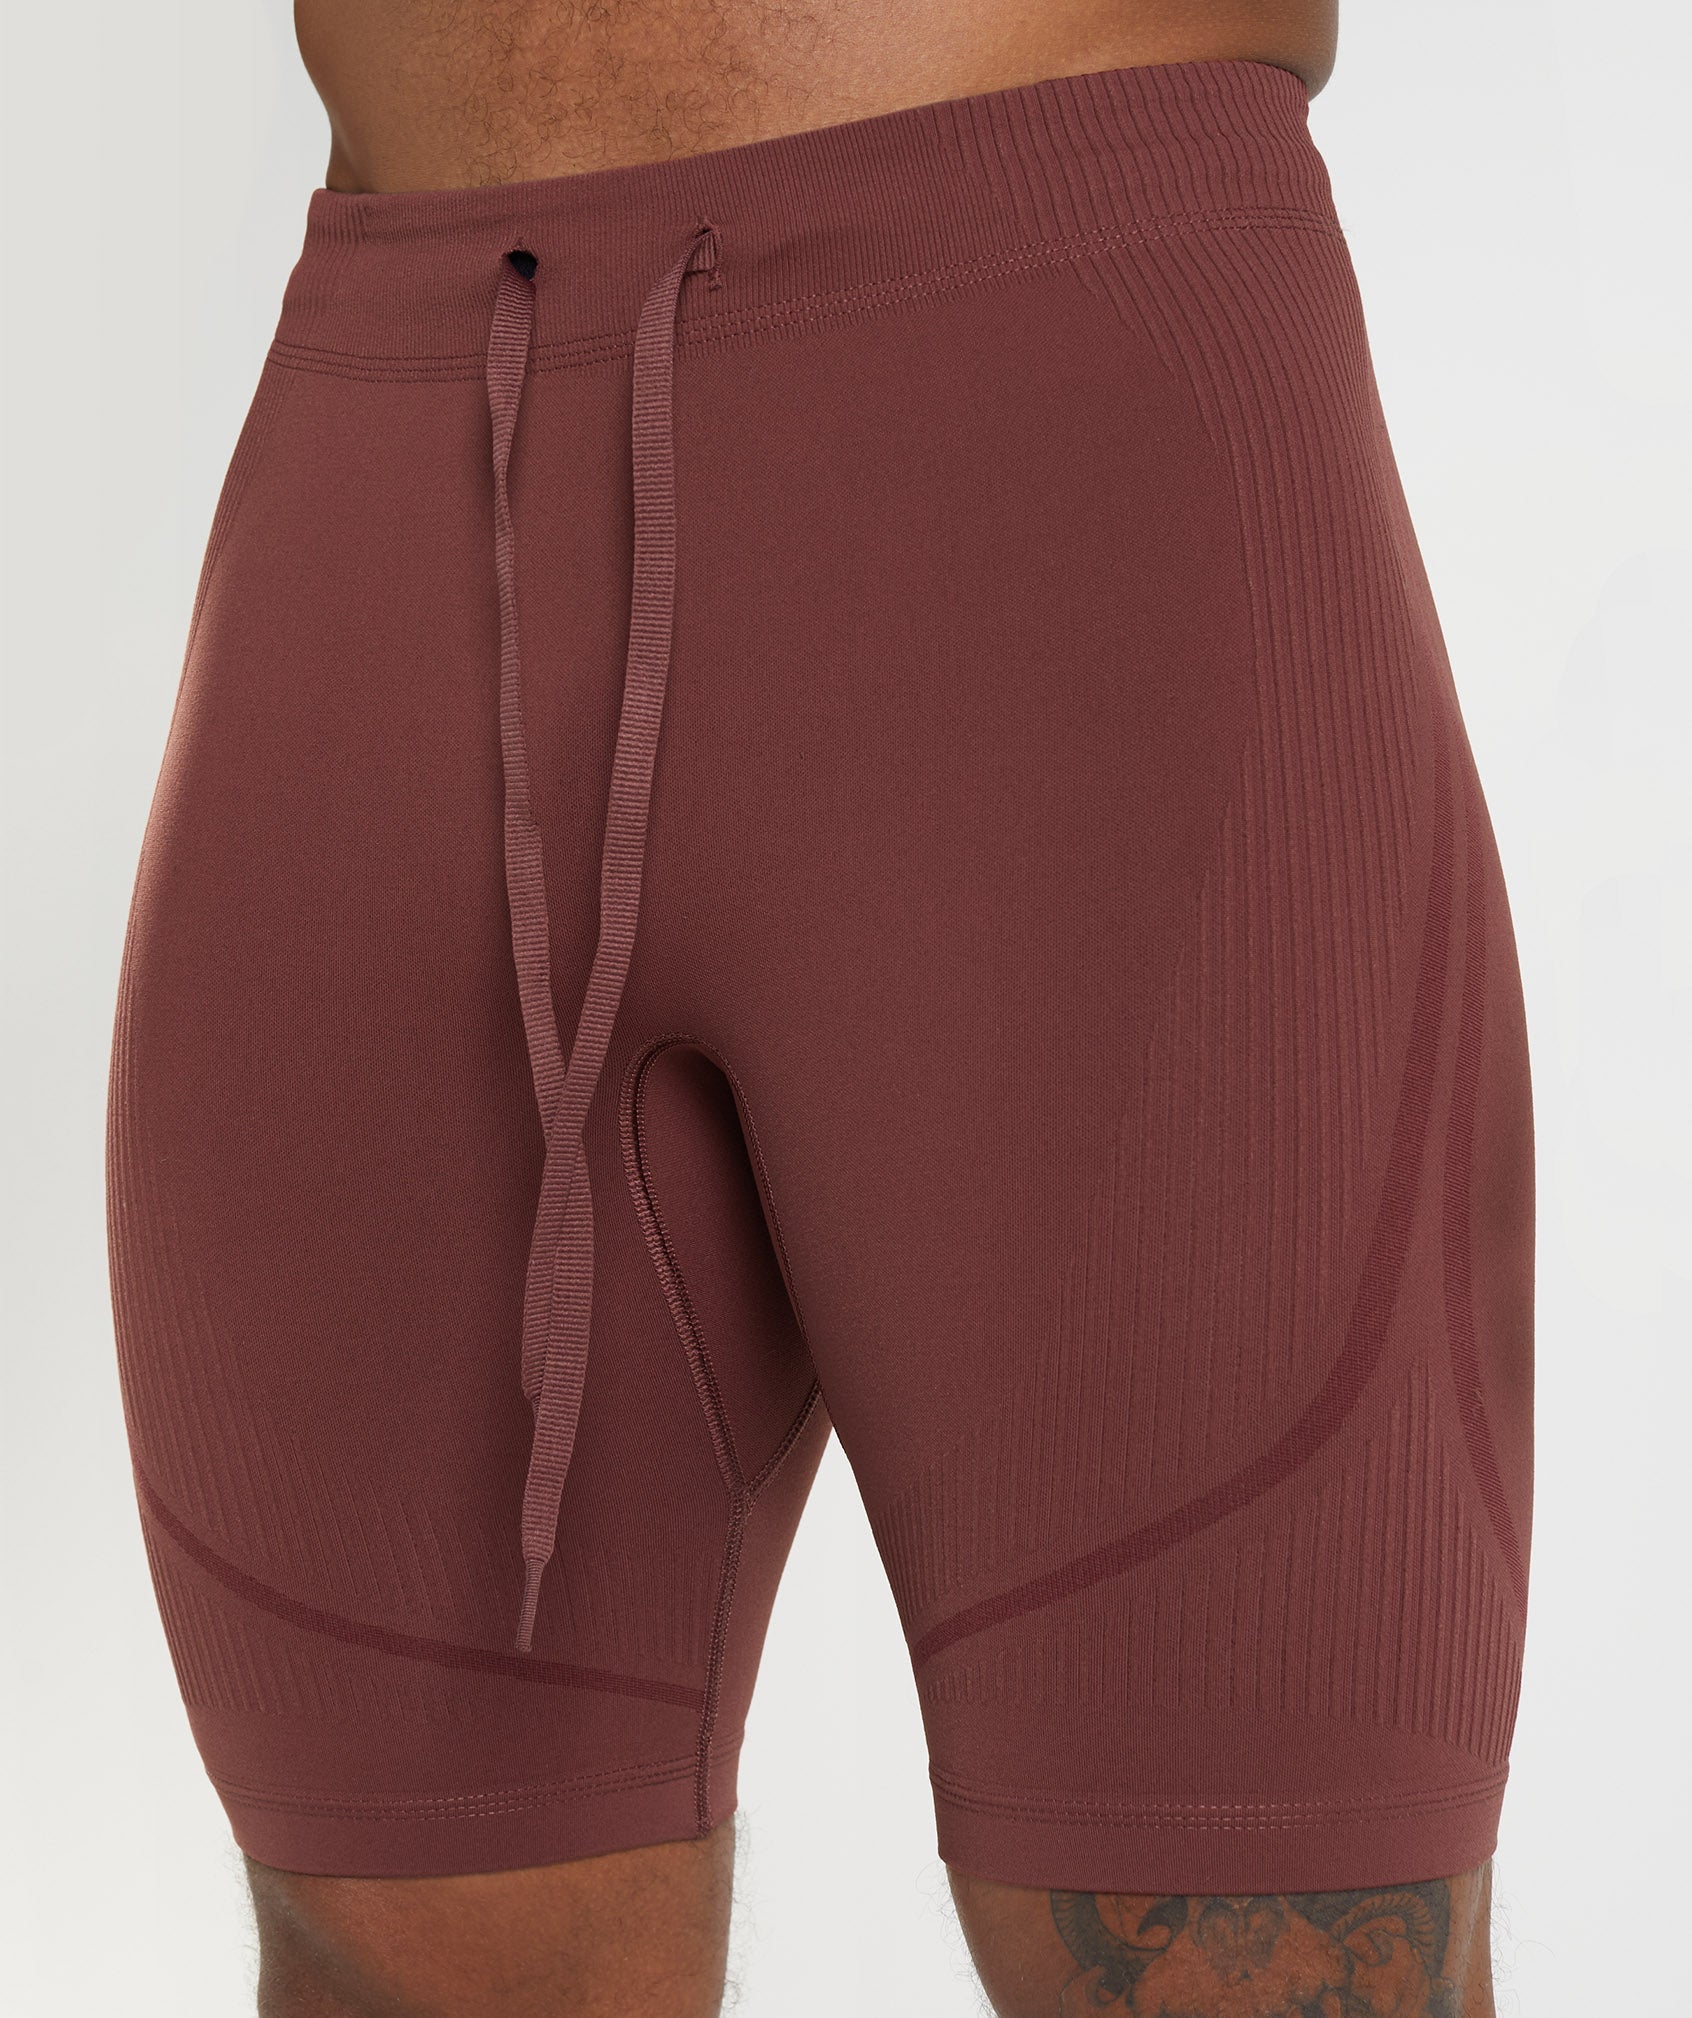 315 Seamless 1/2 Shorts in Cherry Brown/Athletic Maroon - view 6